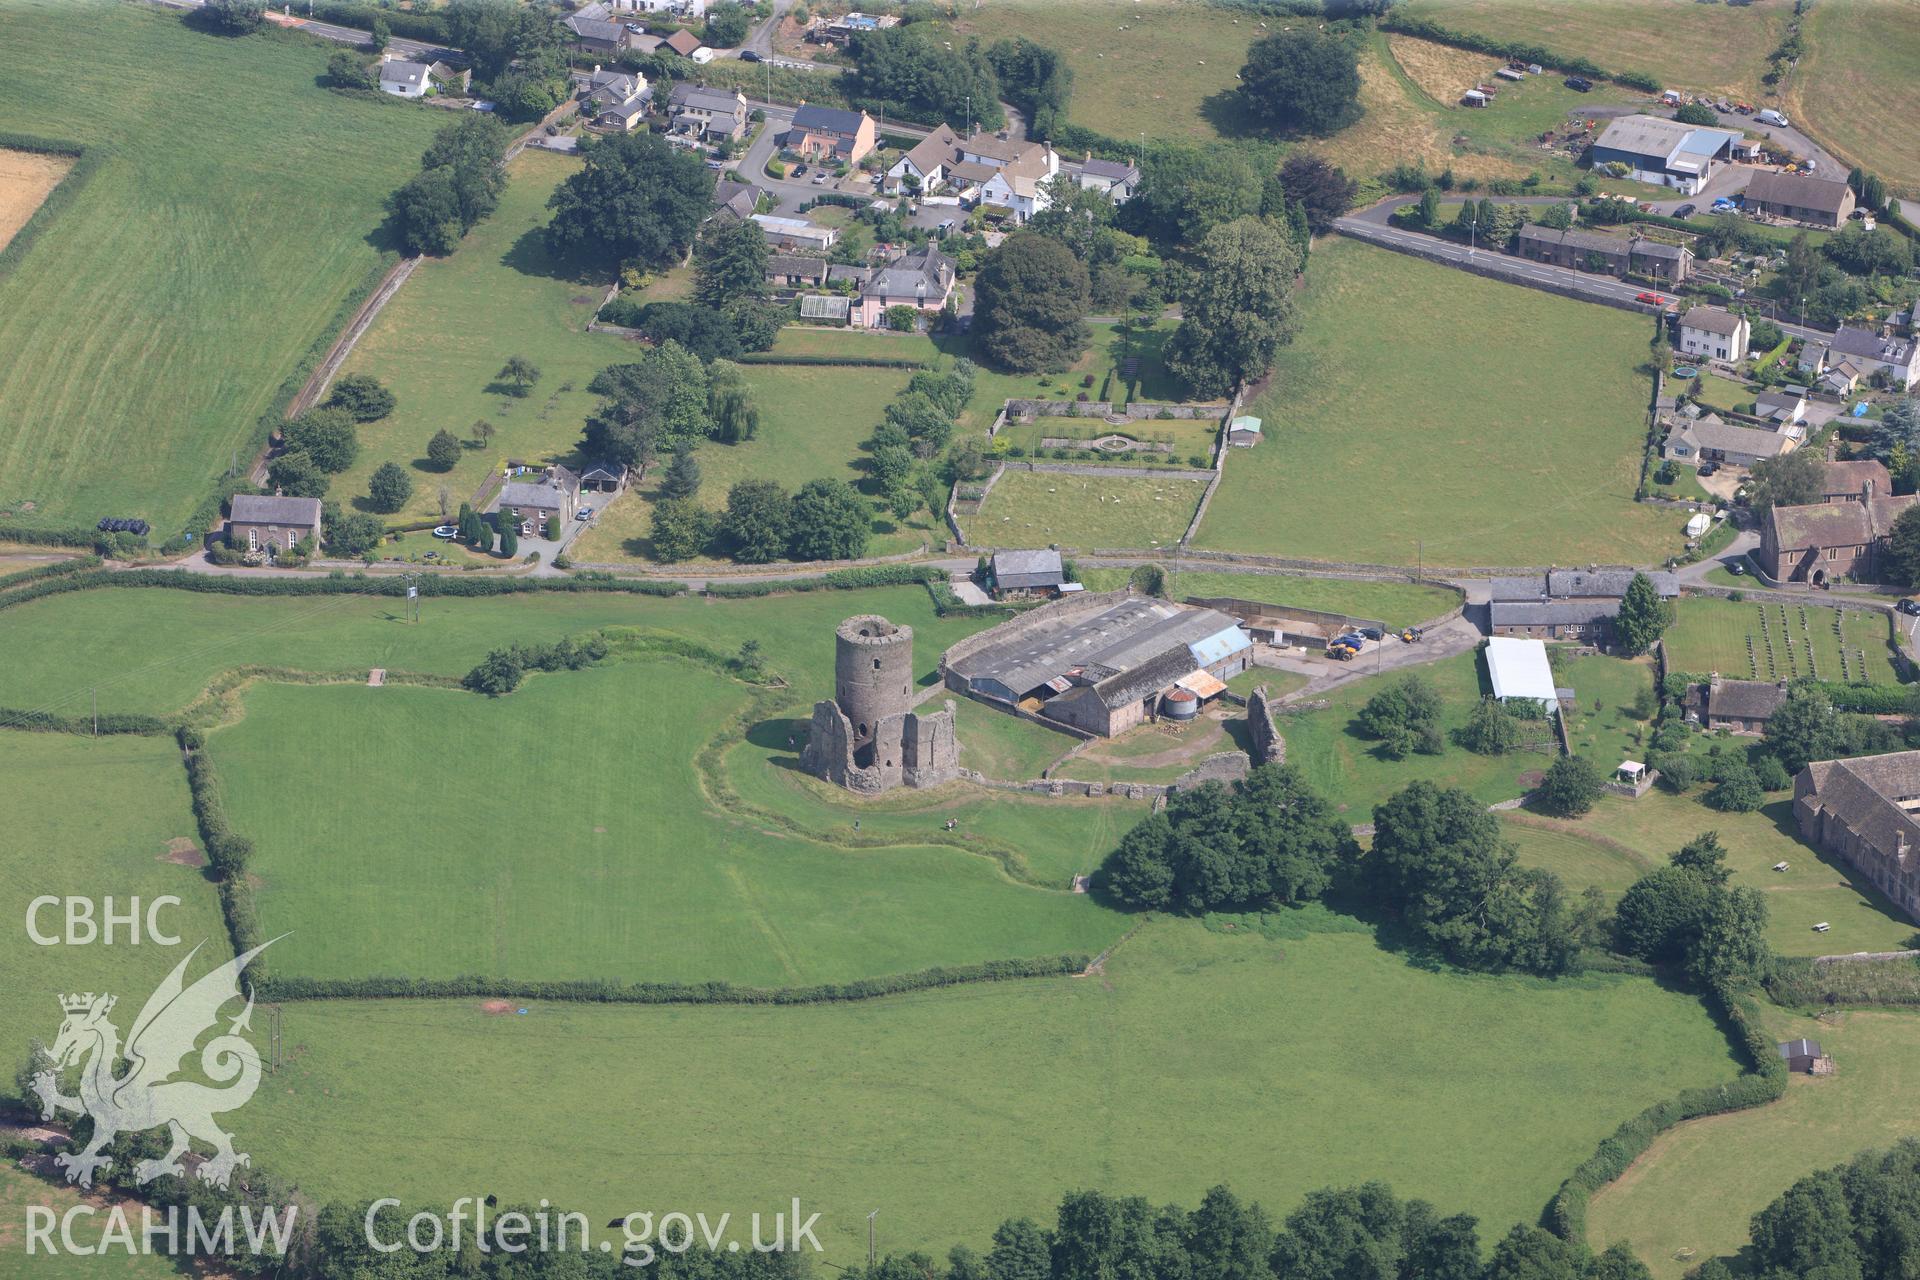 Zoar Independent Chapel; Tretower Shrunken Settlement; Tretower Castle and Court, Tretower, between Abergavenny and Brecon. Oblique aerial photograph taken during Royal Commission?s programme of archaeological aerial reconnaissance by Toby Driver on 1st August 2013.